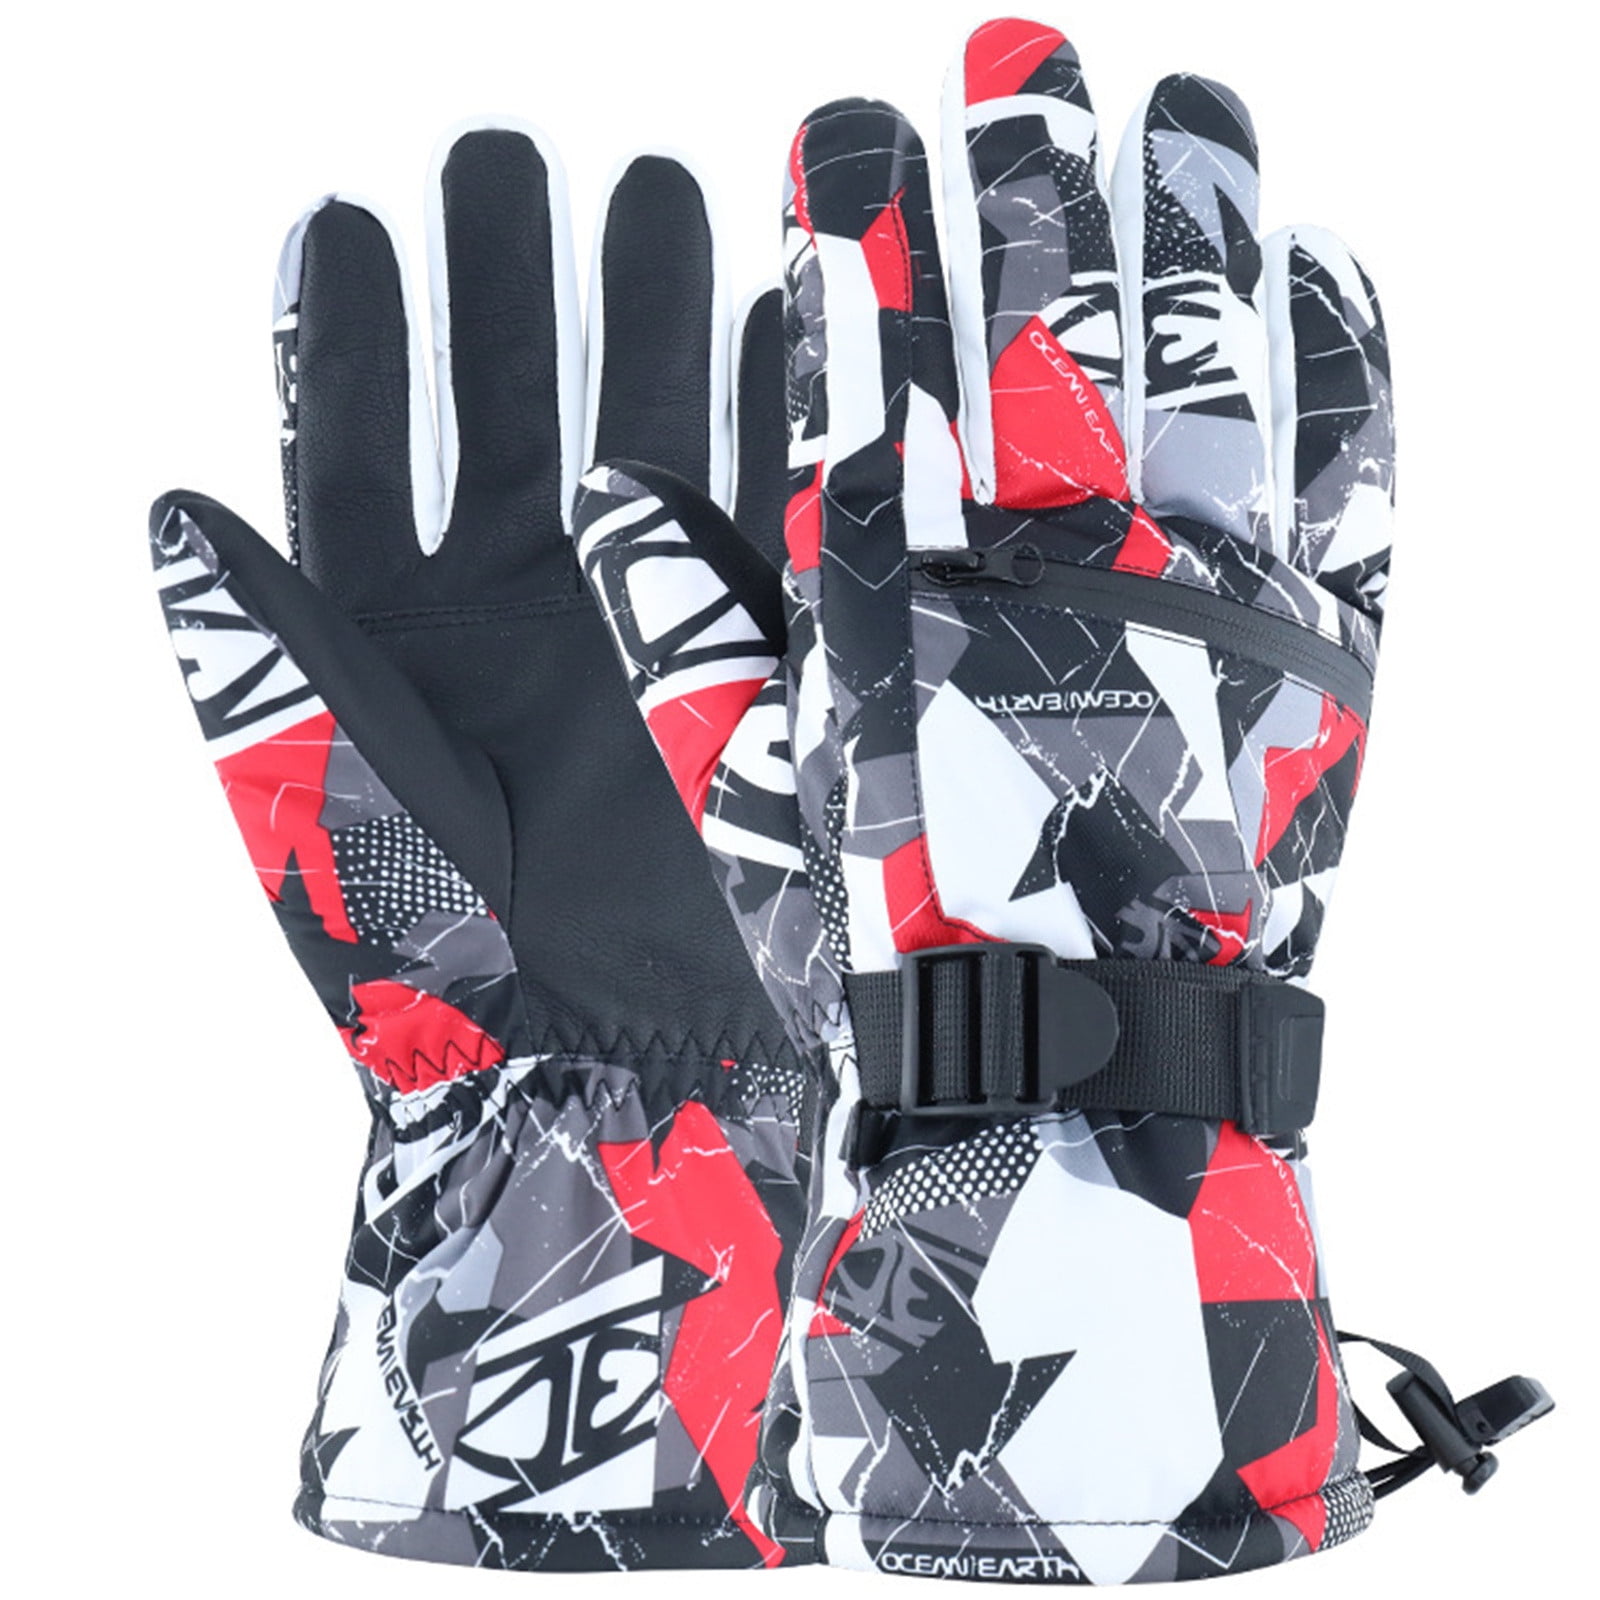 Gubotare Mens Gloves Winter Winter Gloves for Women Girls With Touch Screen  Fingers Warm Thick Texting Bulk Wholesale,Red Medium - Walmart.com